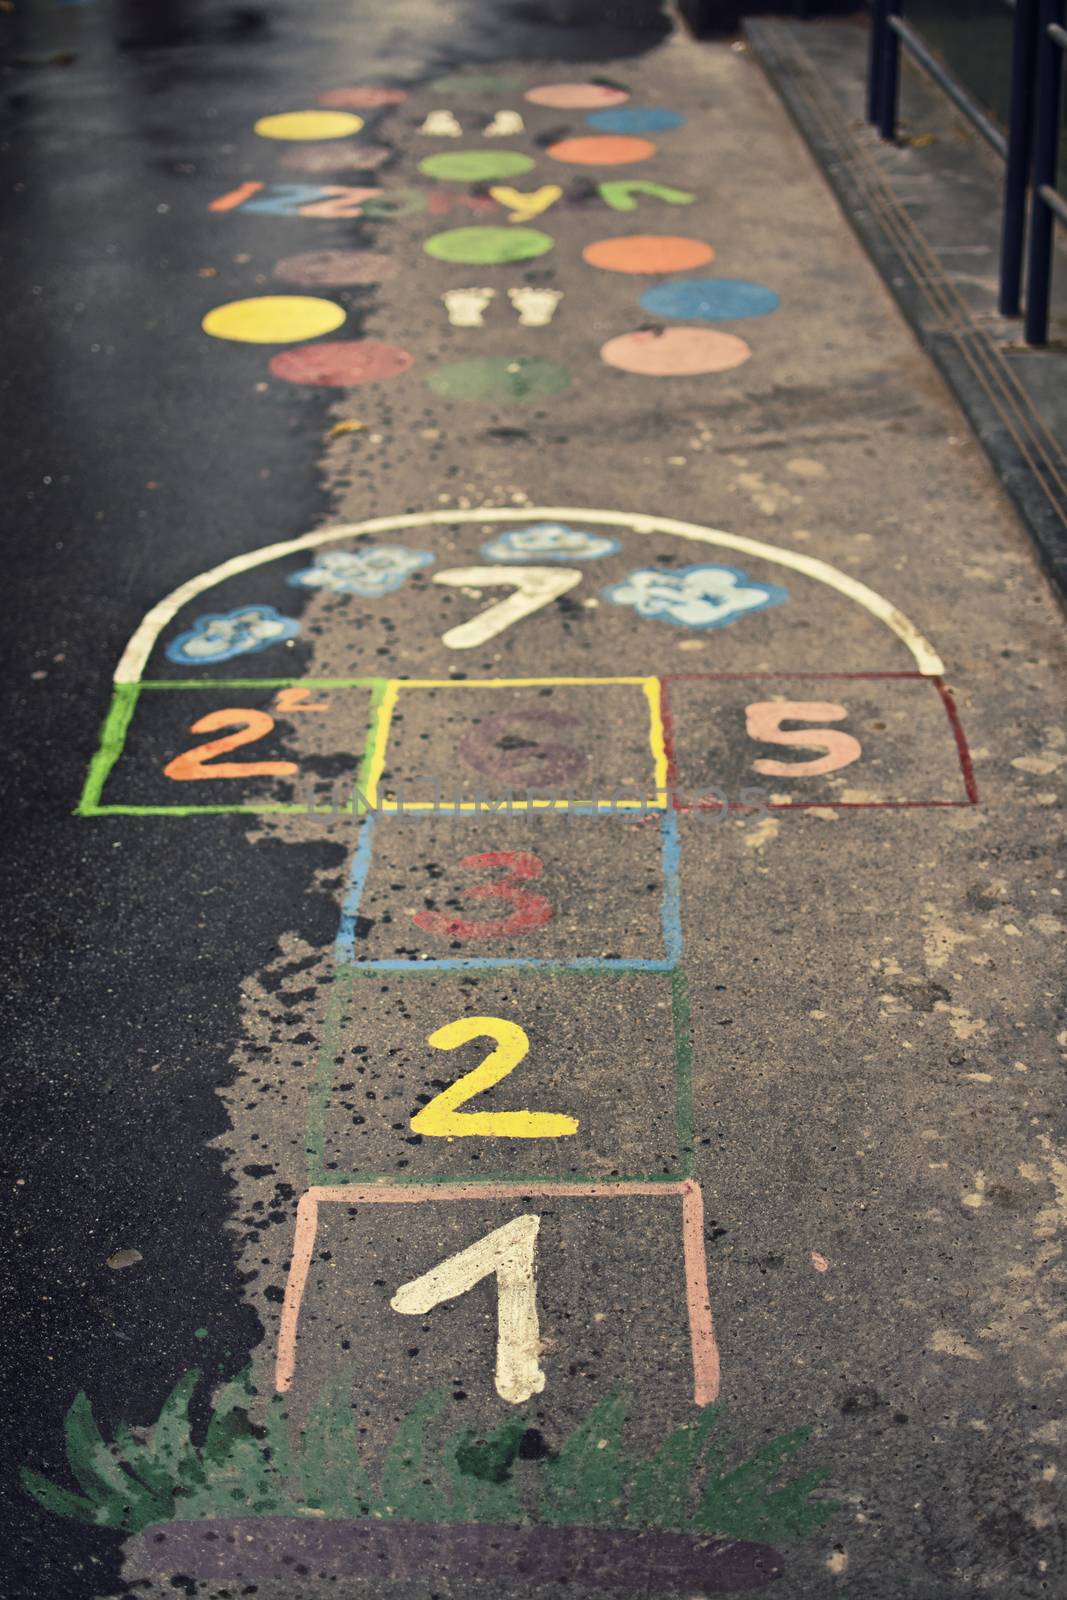 Children's hopscotch game with squares and numbers in different colors on the street.